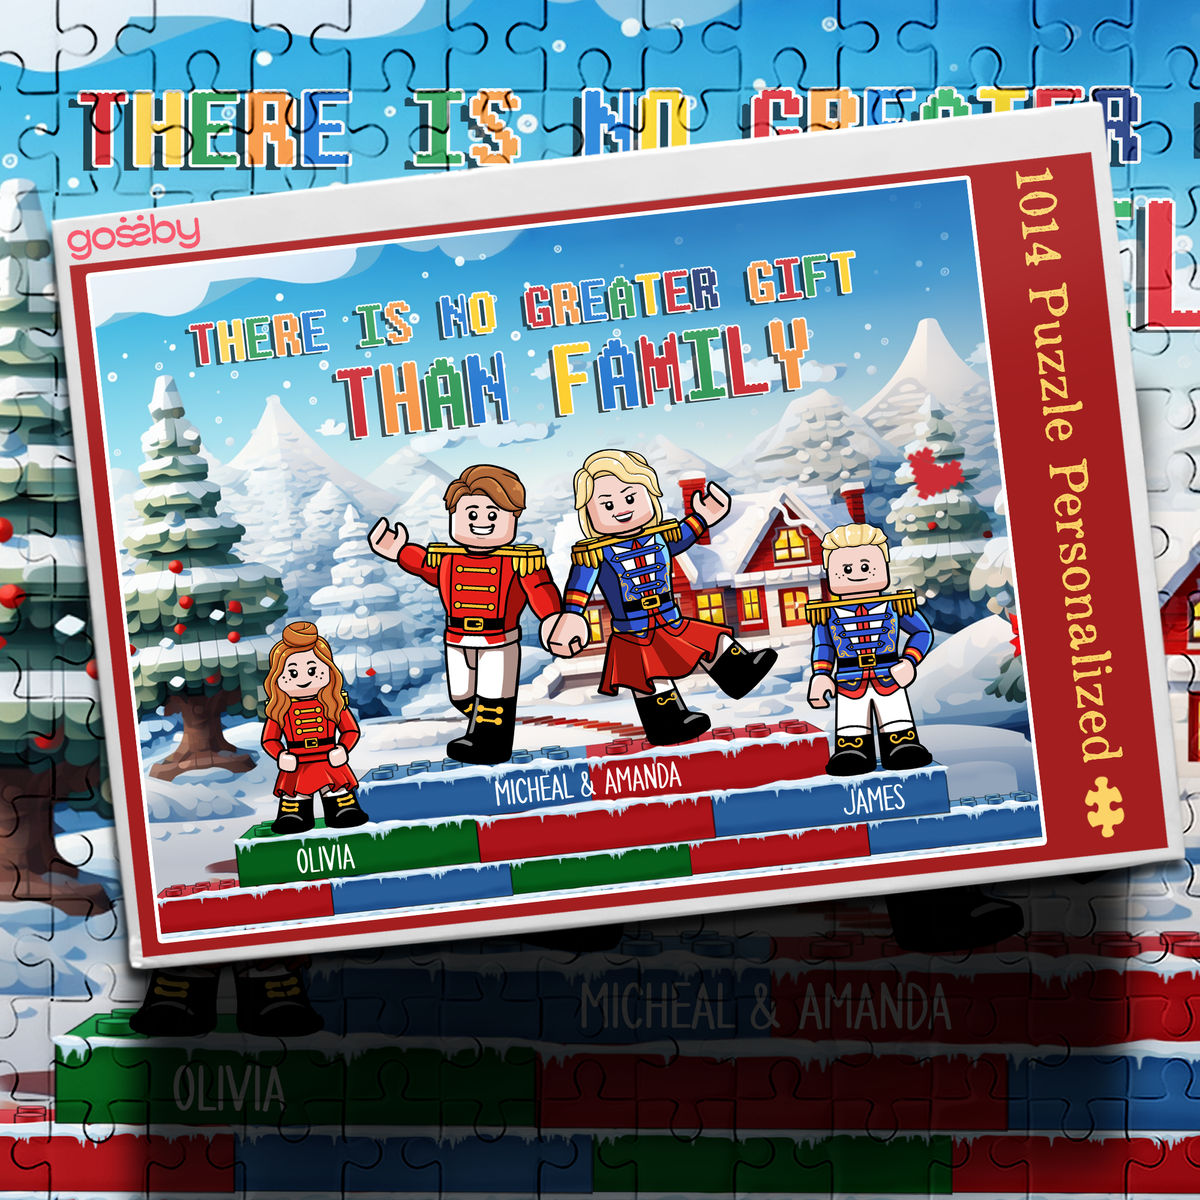 Personalized Puzzle - Personalized Jigsaw Puzzles - There is no Greater Gift than Family - Figure Family Christmas Together_1